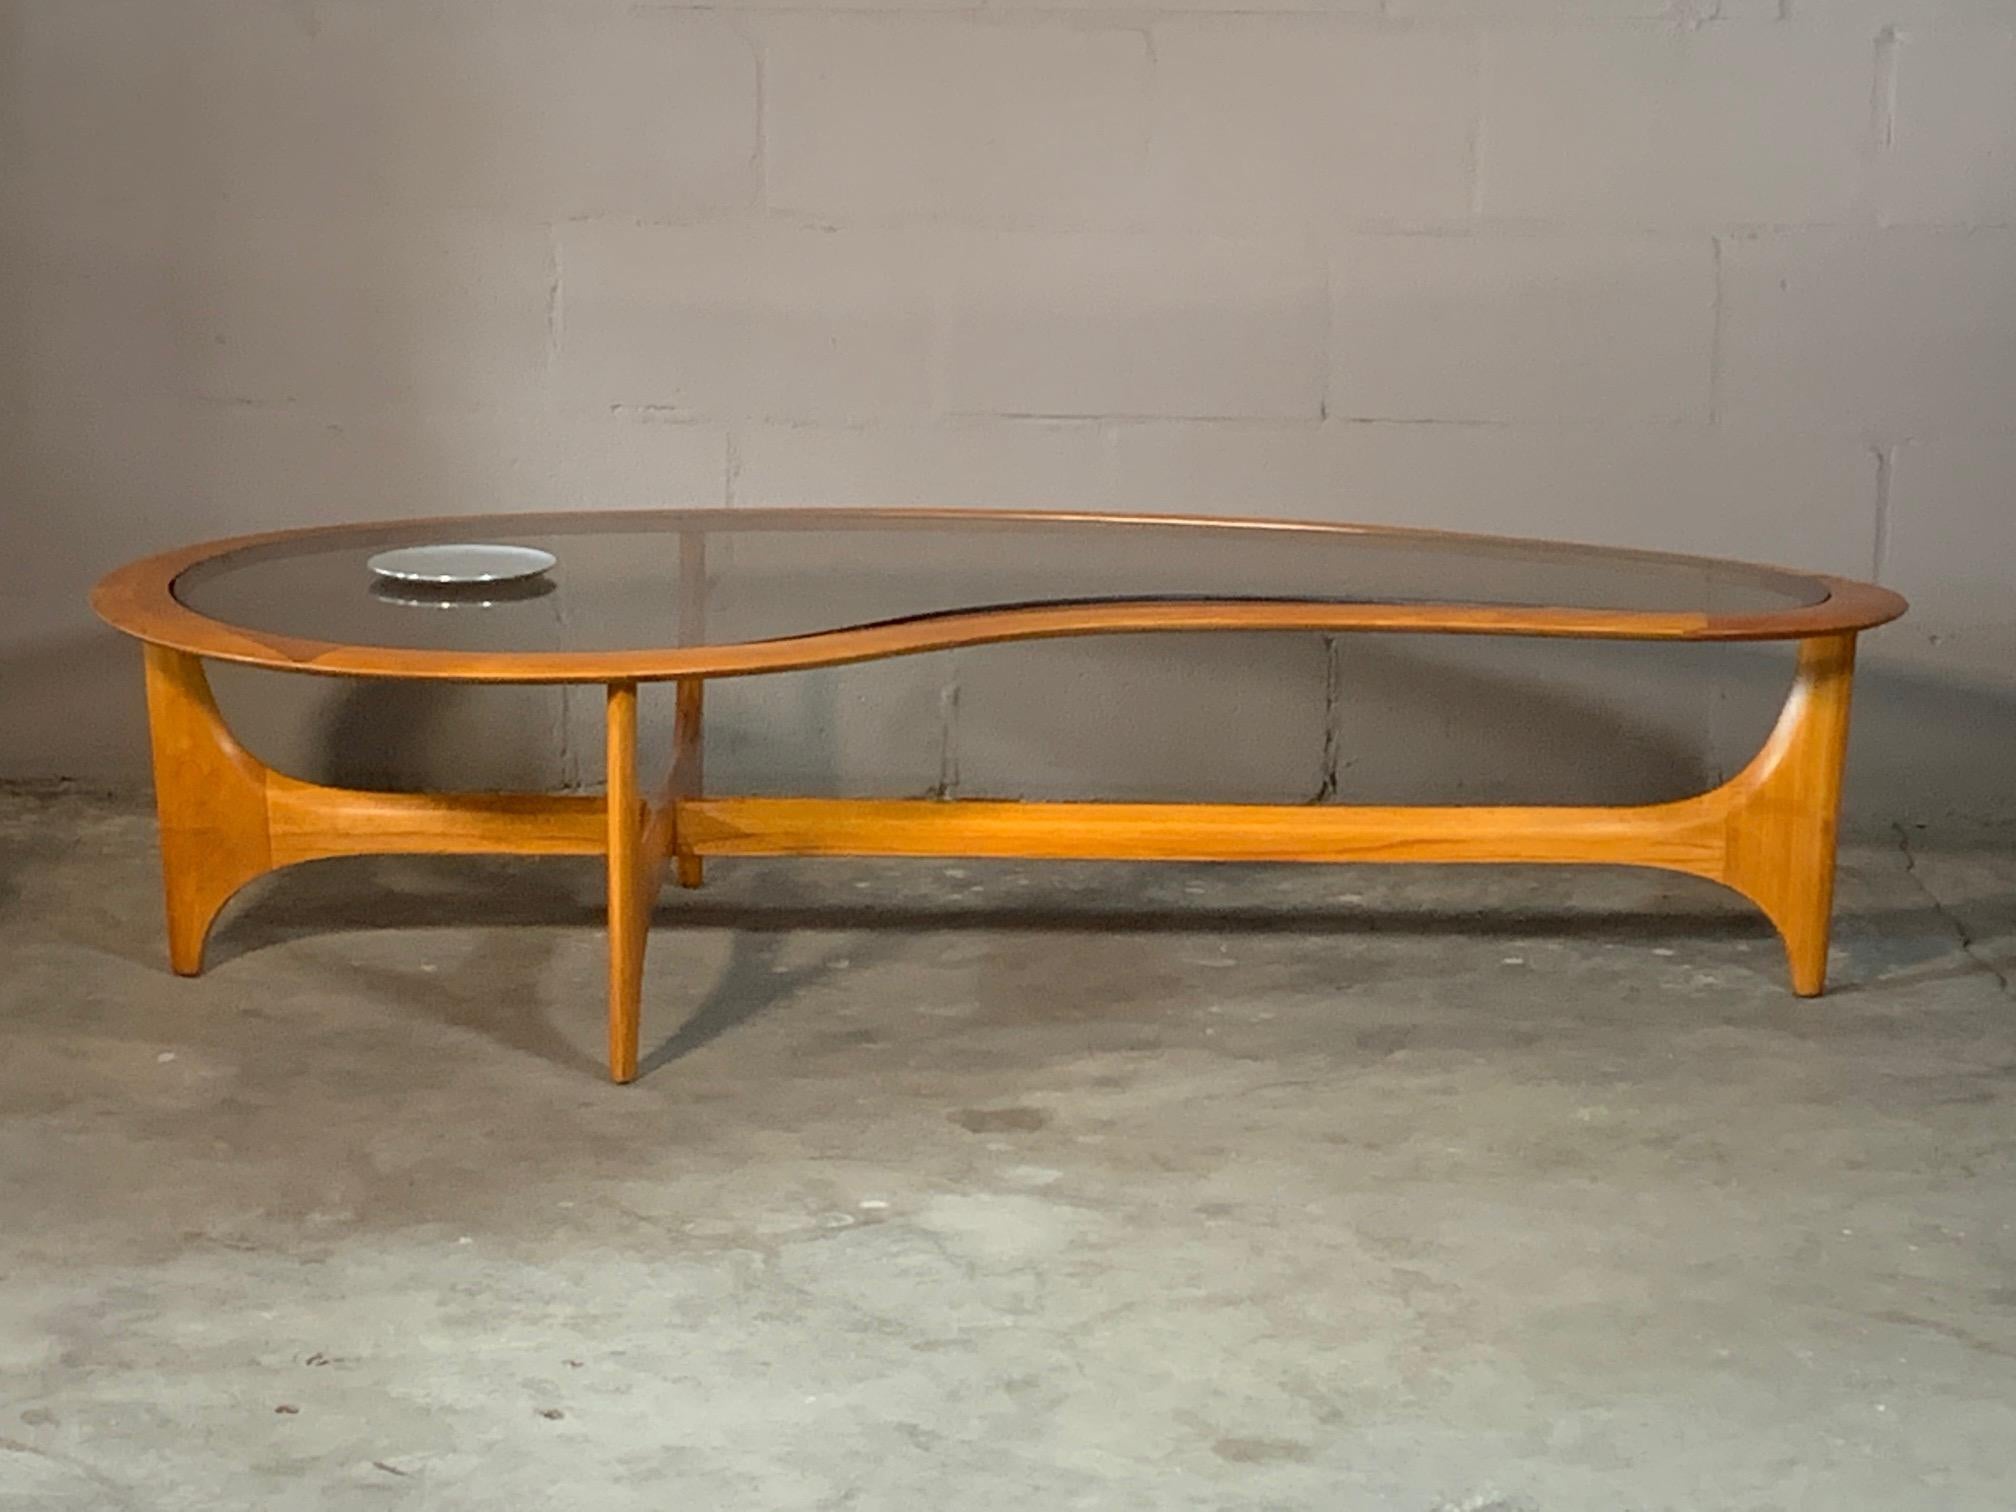 A classic biomorphic coffee table by Lane, circa 1960s. Made of elmwood, glass top. Completely restored with a beautiful hand rubbed finish.